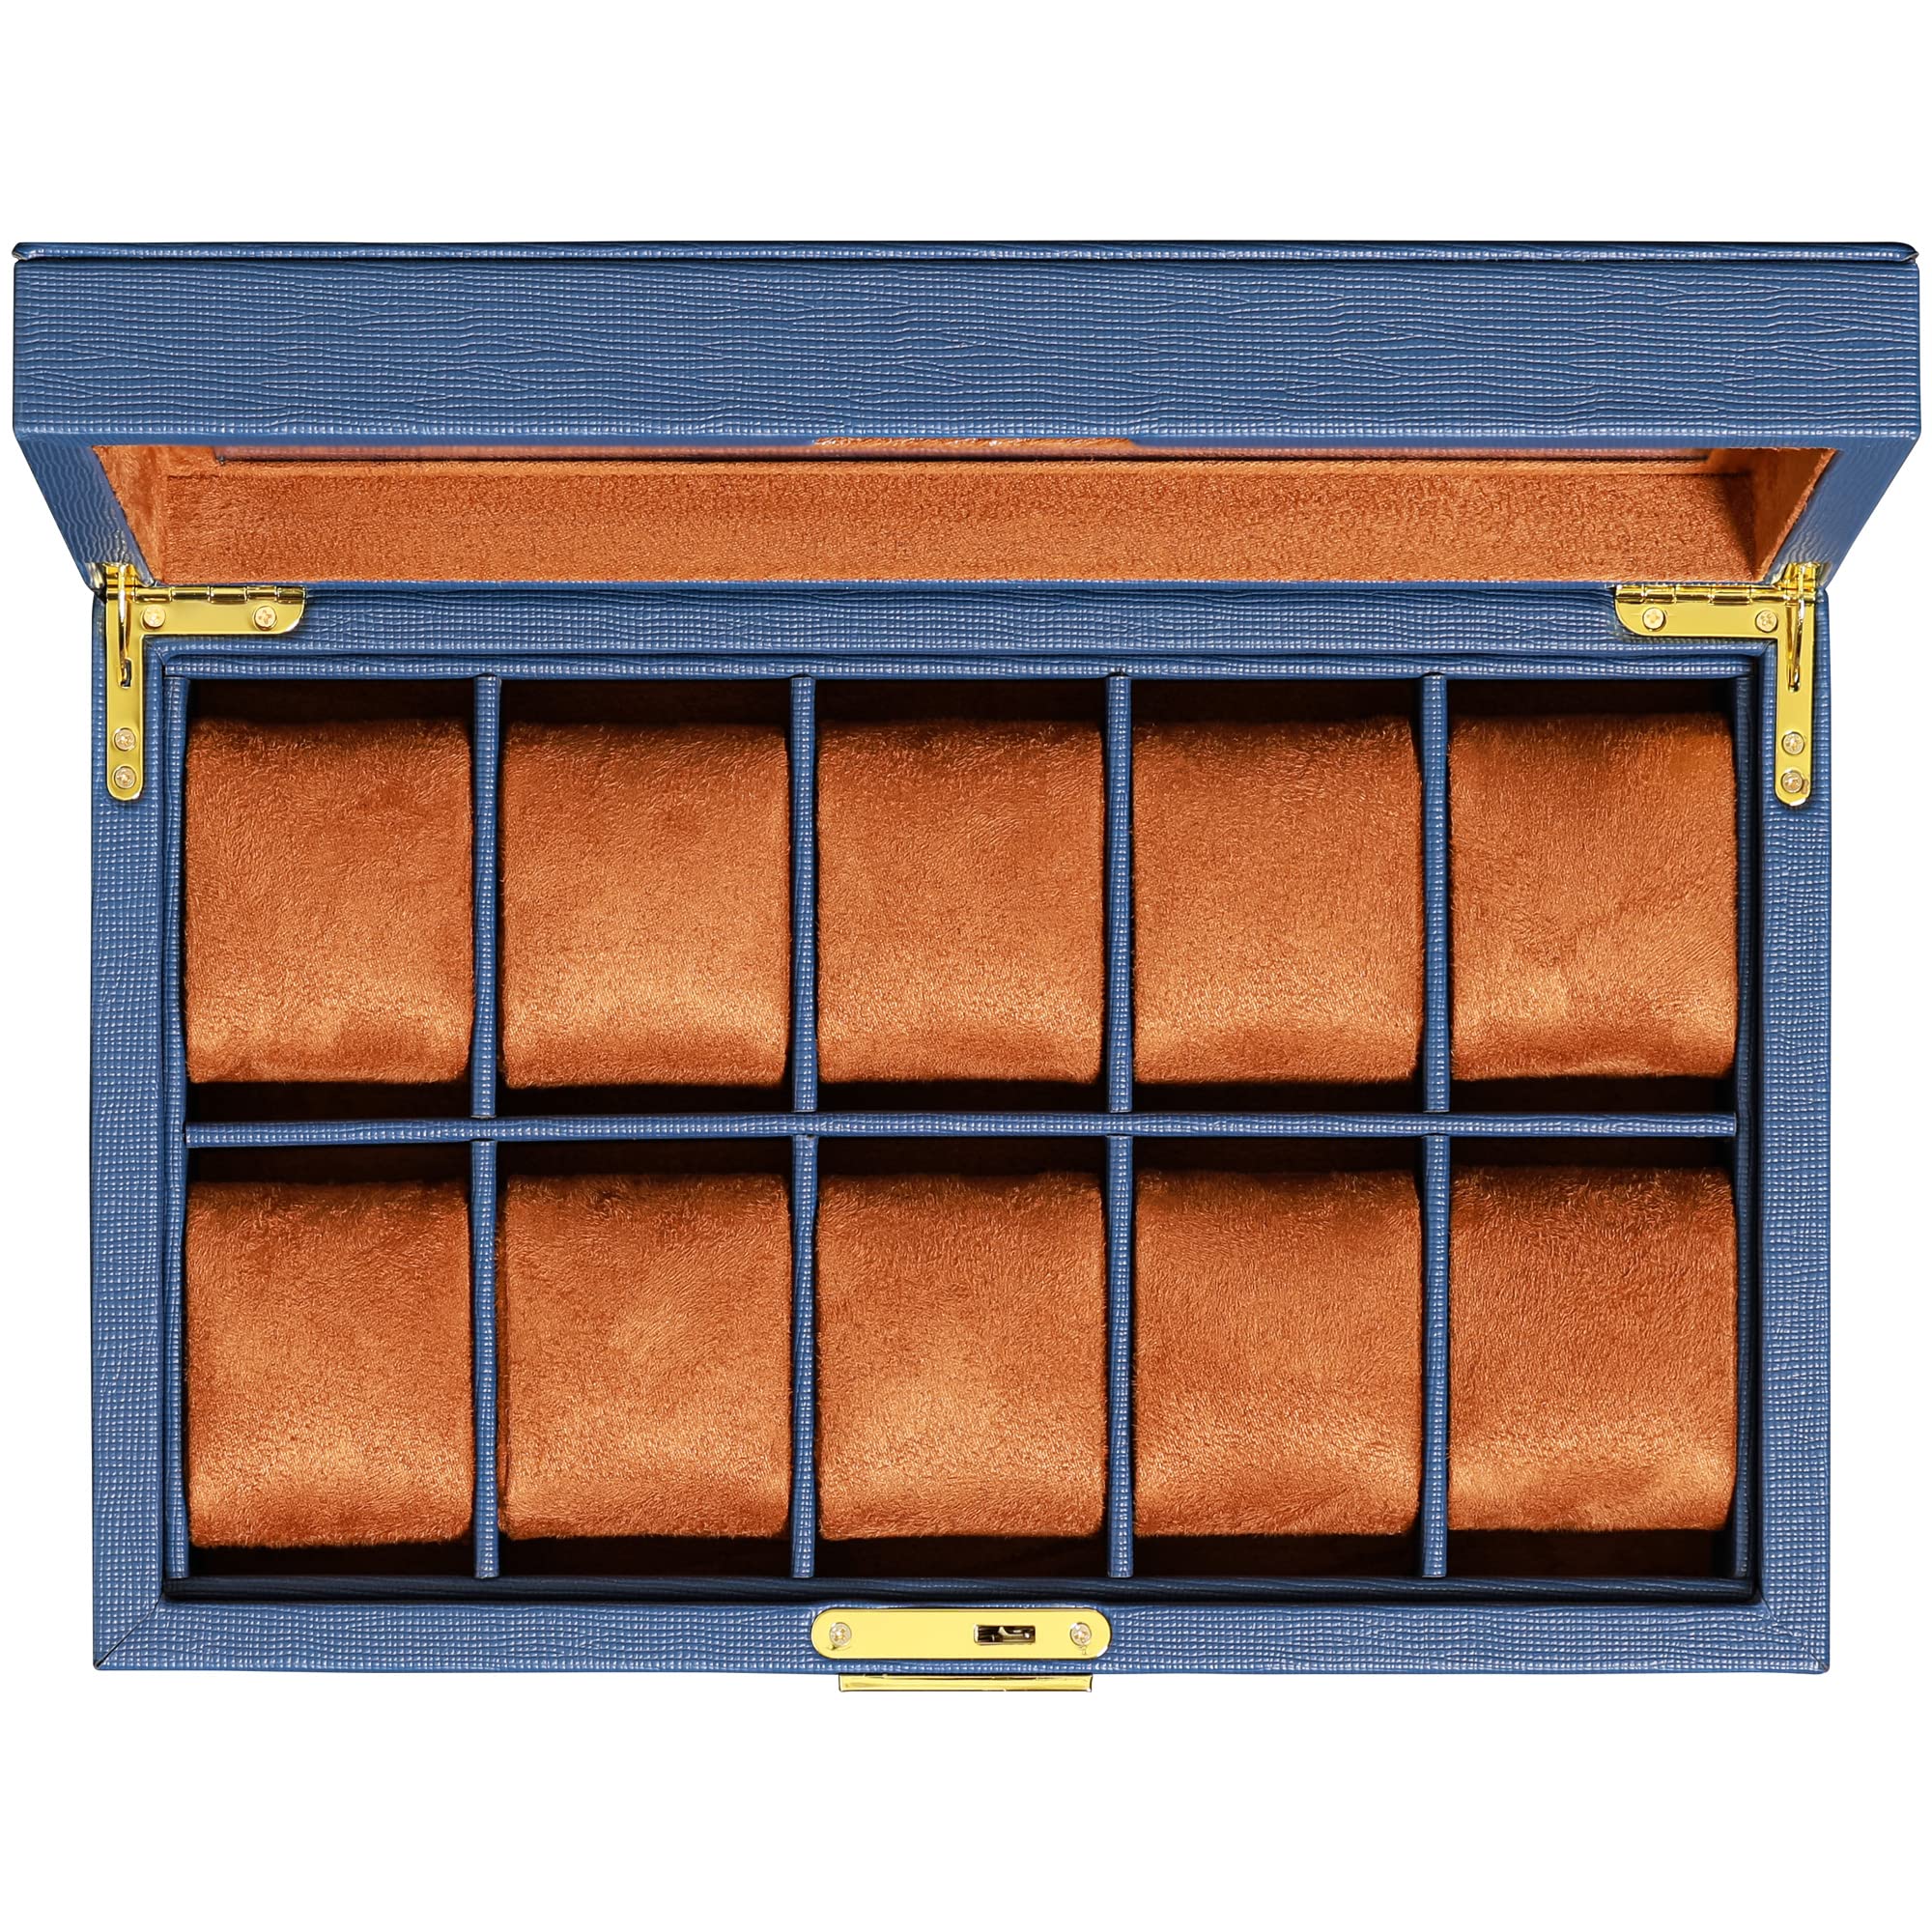 ROTHWELL Gift Set 10 Slot Leather Watch Box & Matching 5 Watch Travel Case - Luxury Watch Case Display Organizer, Locking Mens Jewelry Watches Holder, Men's Storage Boxes Glass Top Blue/Tan